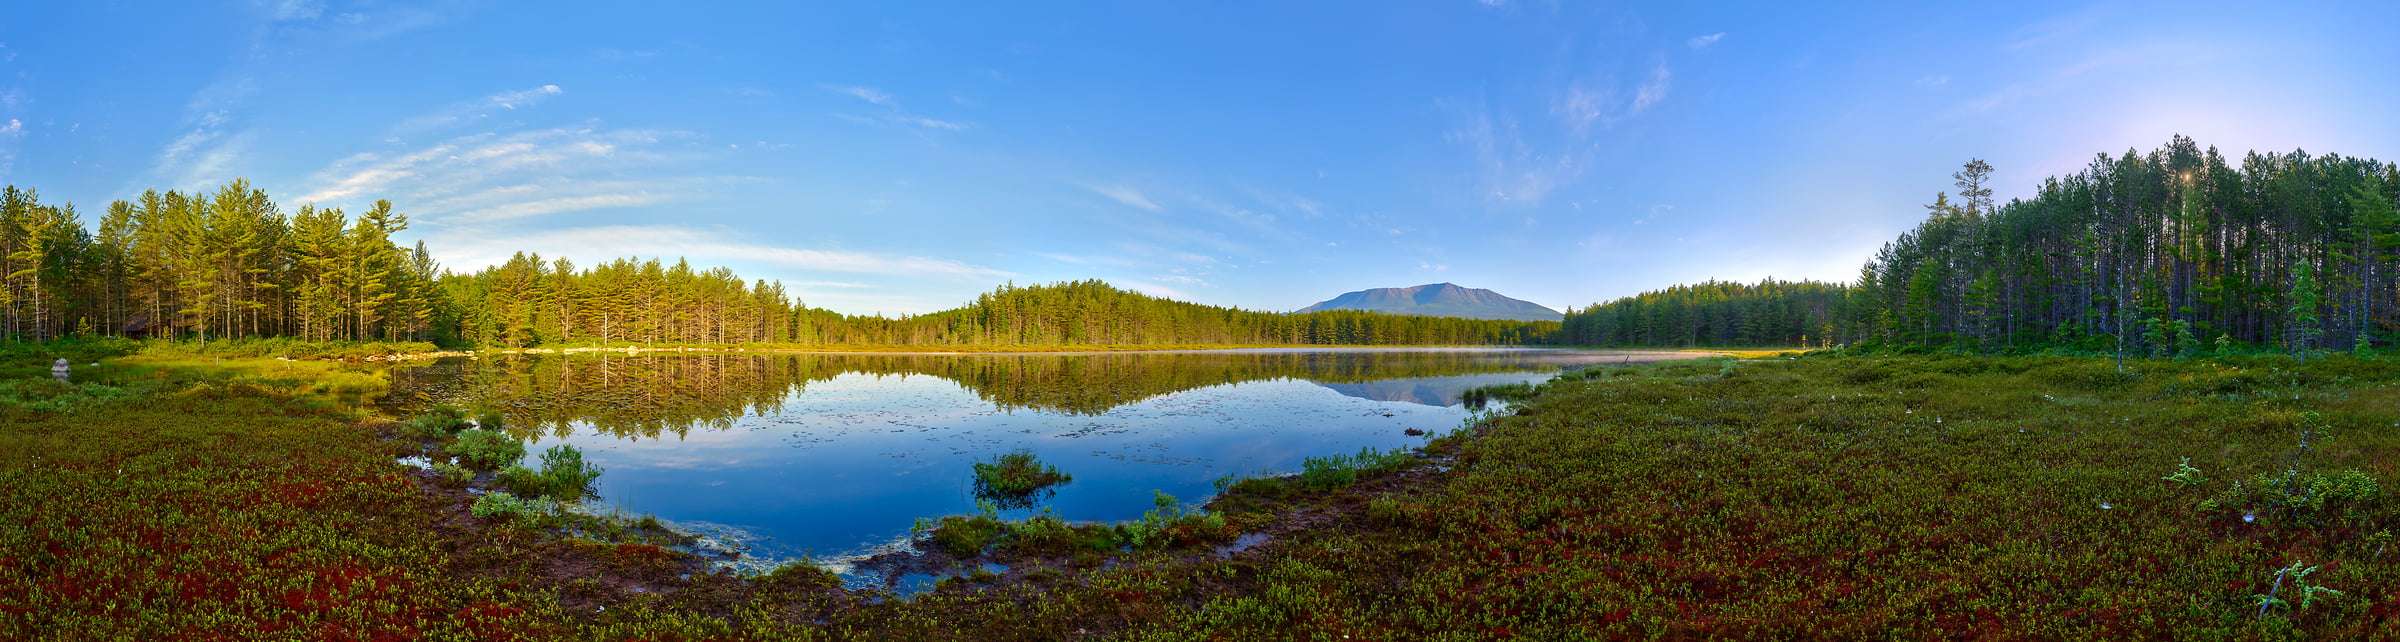 494 megapixels! A very high resolution, large-format VAST photo of Mt. Katahdin and Sunday Pond; fine art landscape photograph created by Aaron Priest in Baxter State Park, Maine.